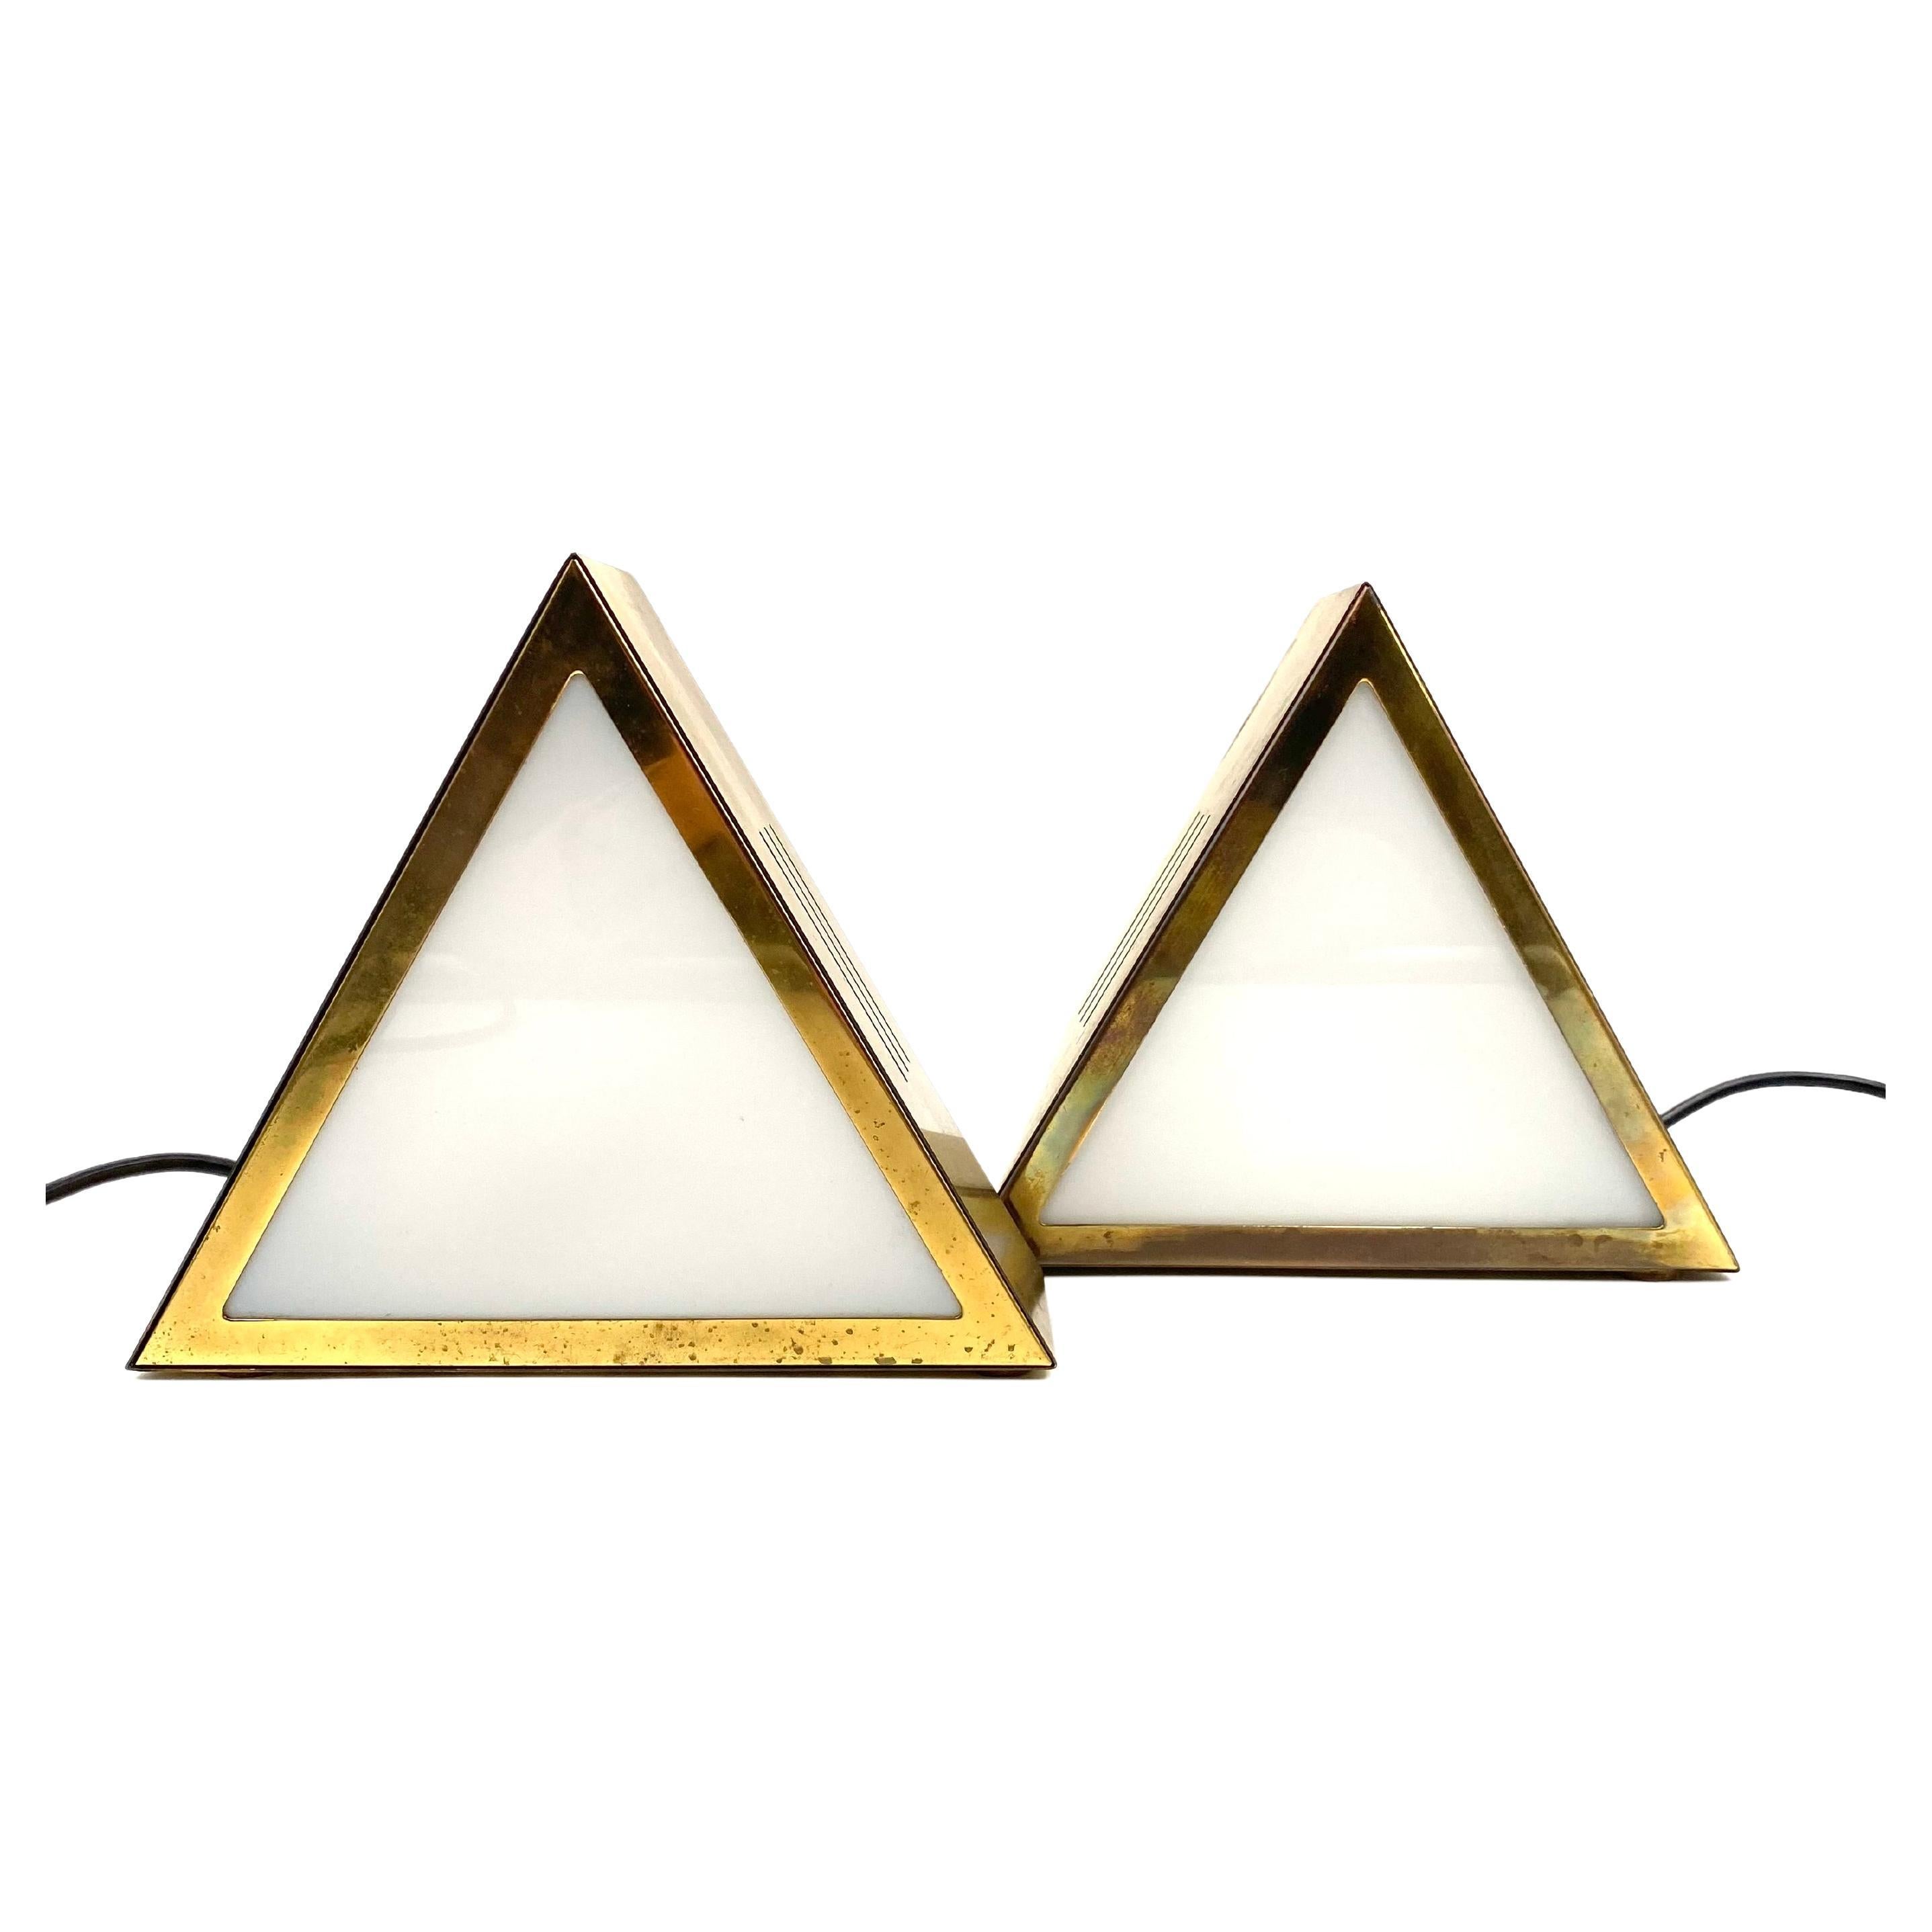 Set of 2 Triangular Brass Table Lamps, Italy, 1970s